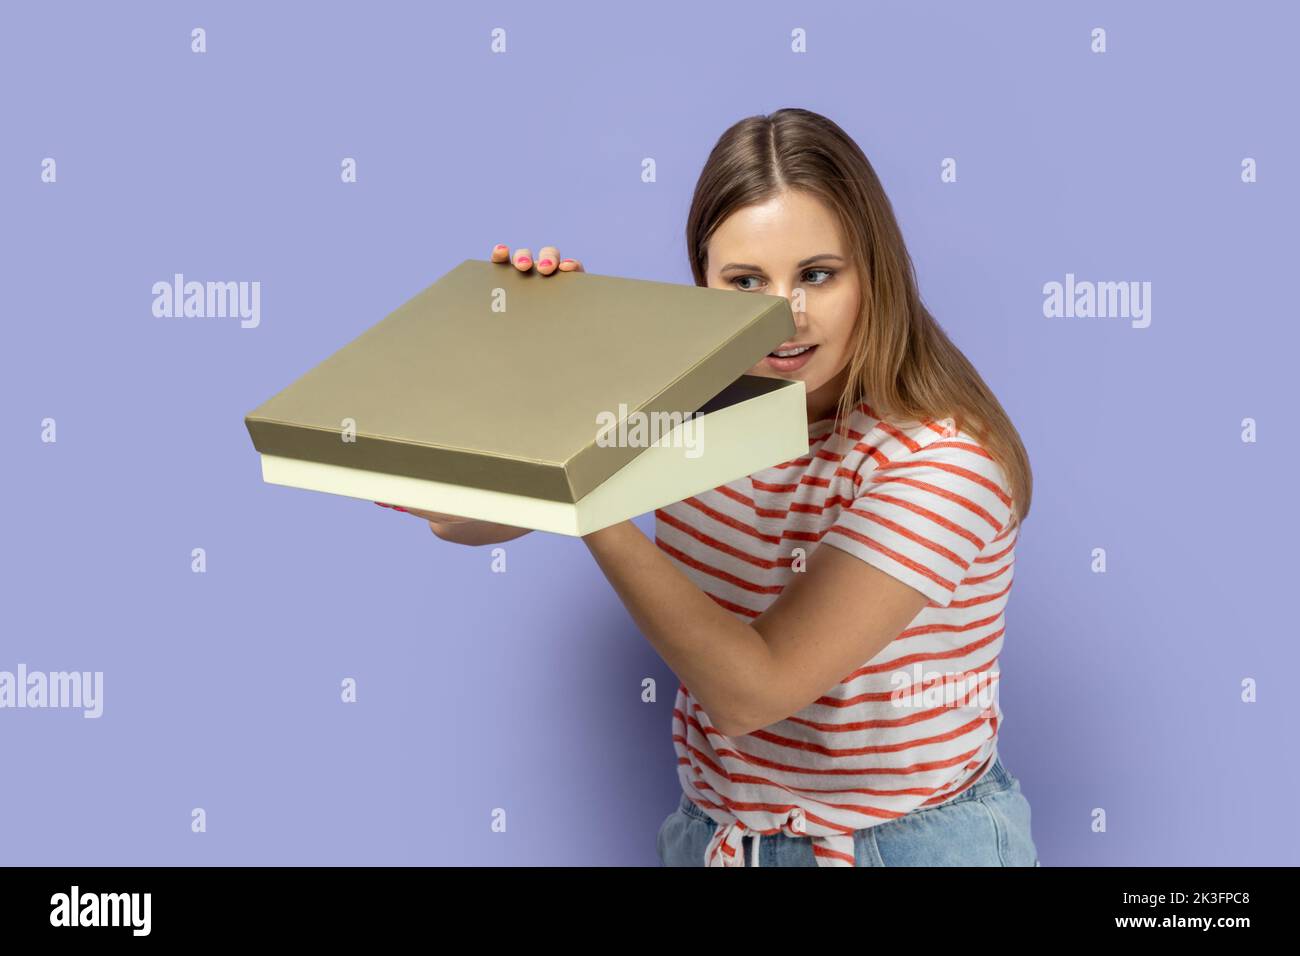 Portrait of curious calm blond woman wearing striped T-shirt standing holding present box and looking inside, interesting what inside. Indoor studio shot isolated on purple background. Stock Photo